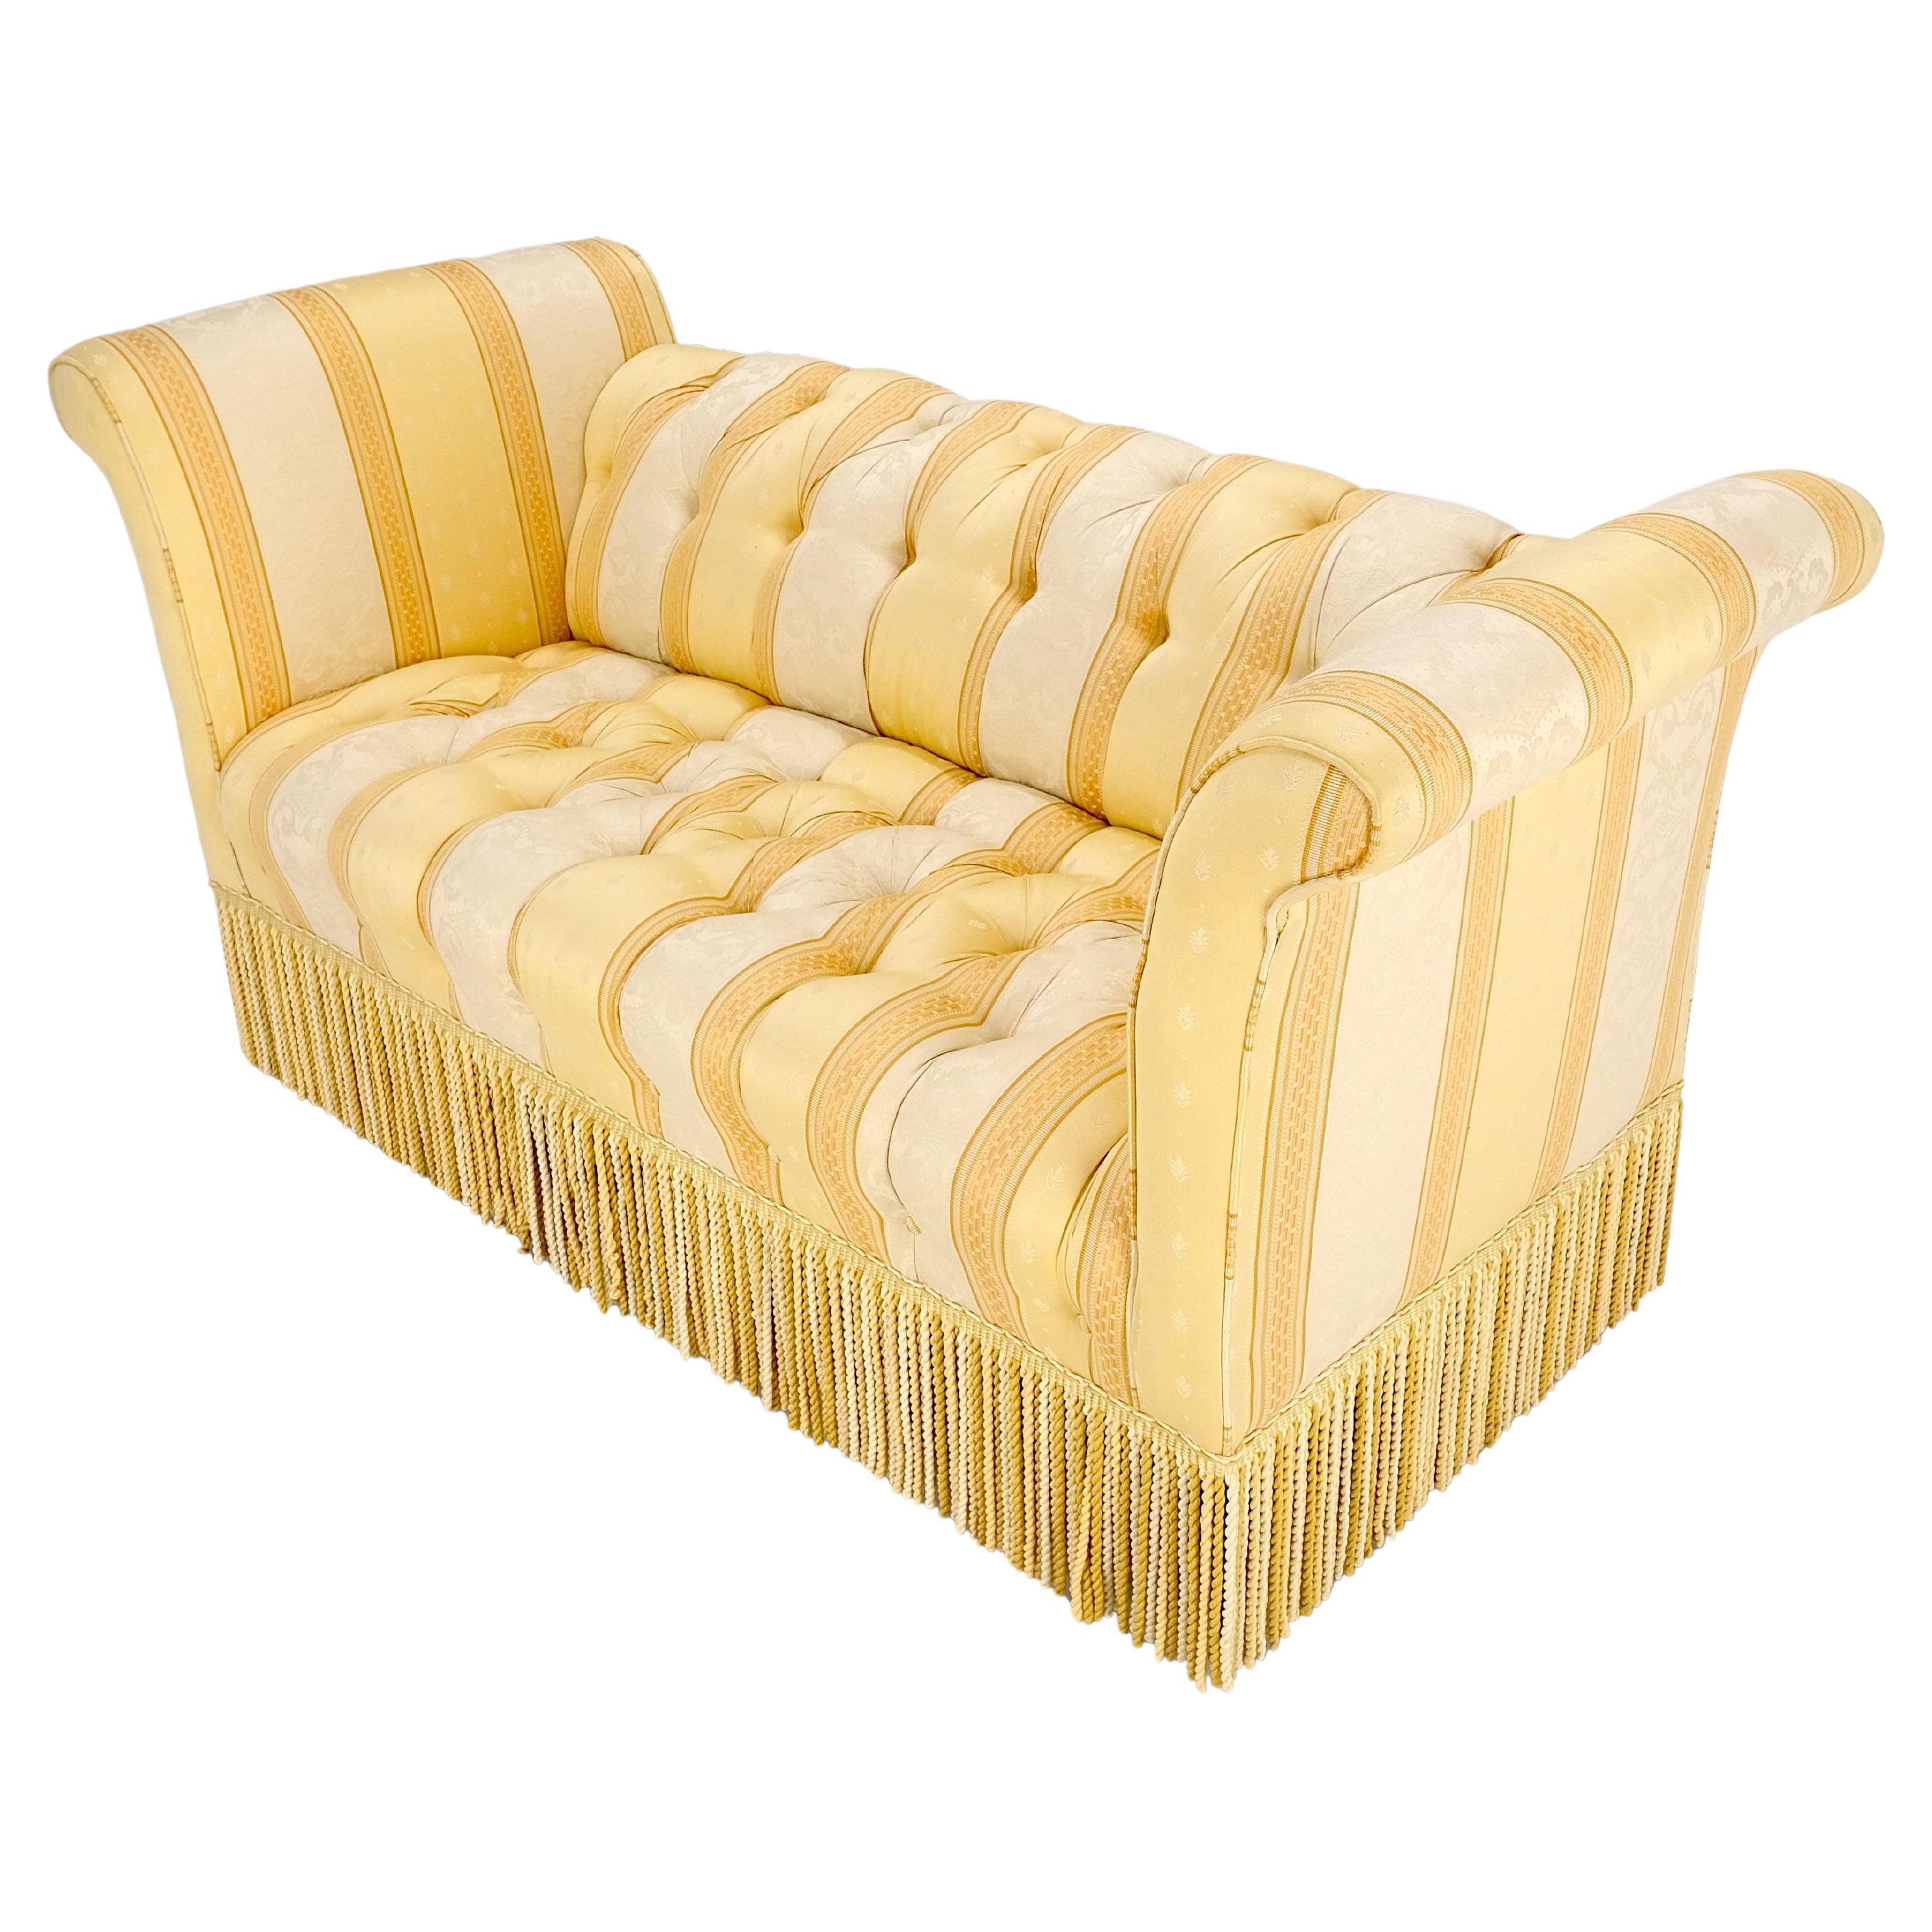 Gold & White Stripe Silk Upholstery Tufted Sofa Loveseat Tassels Decorated MINT!